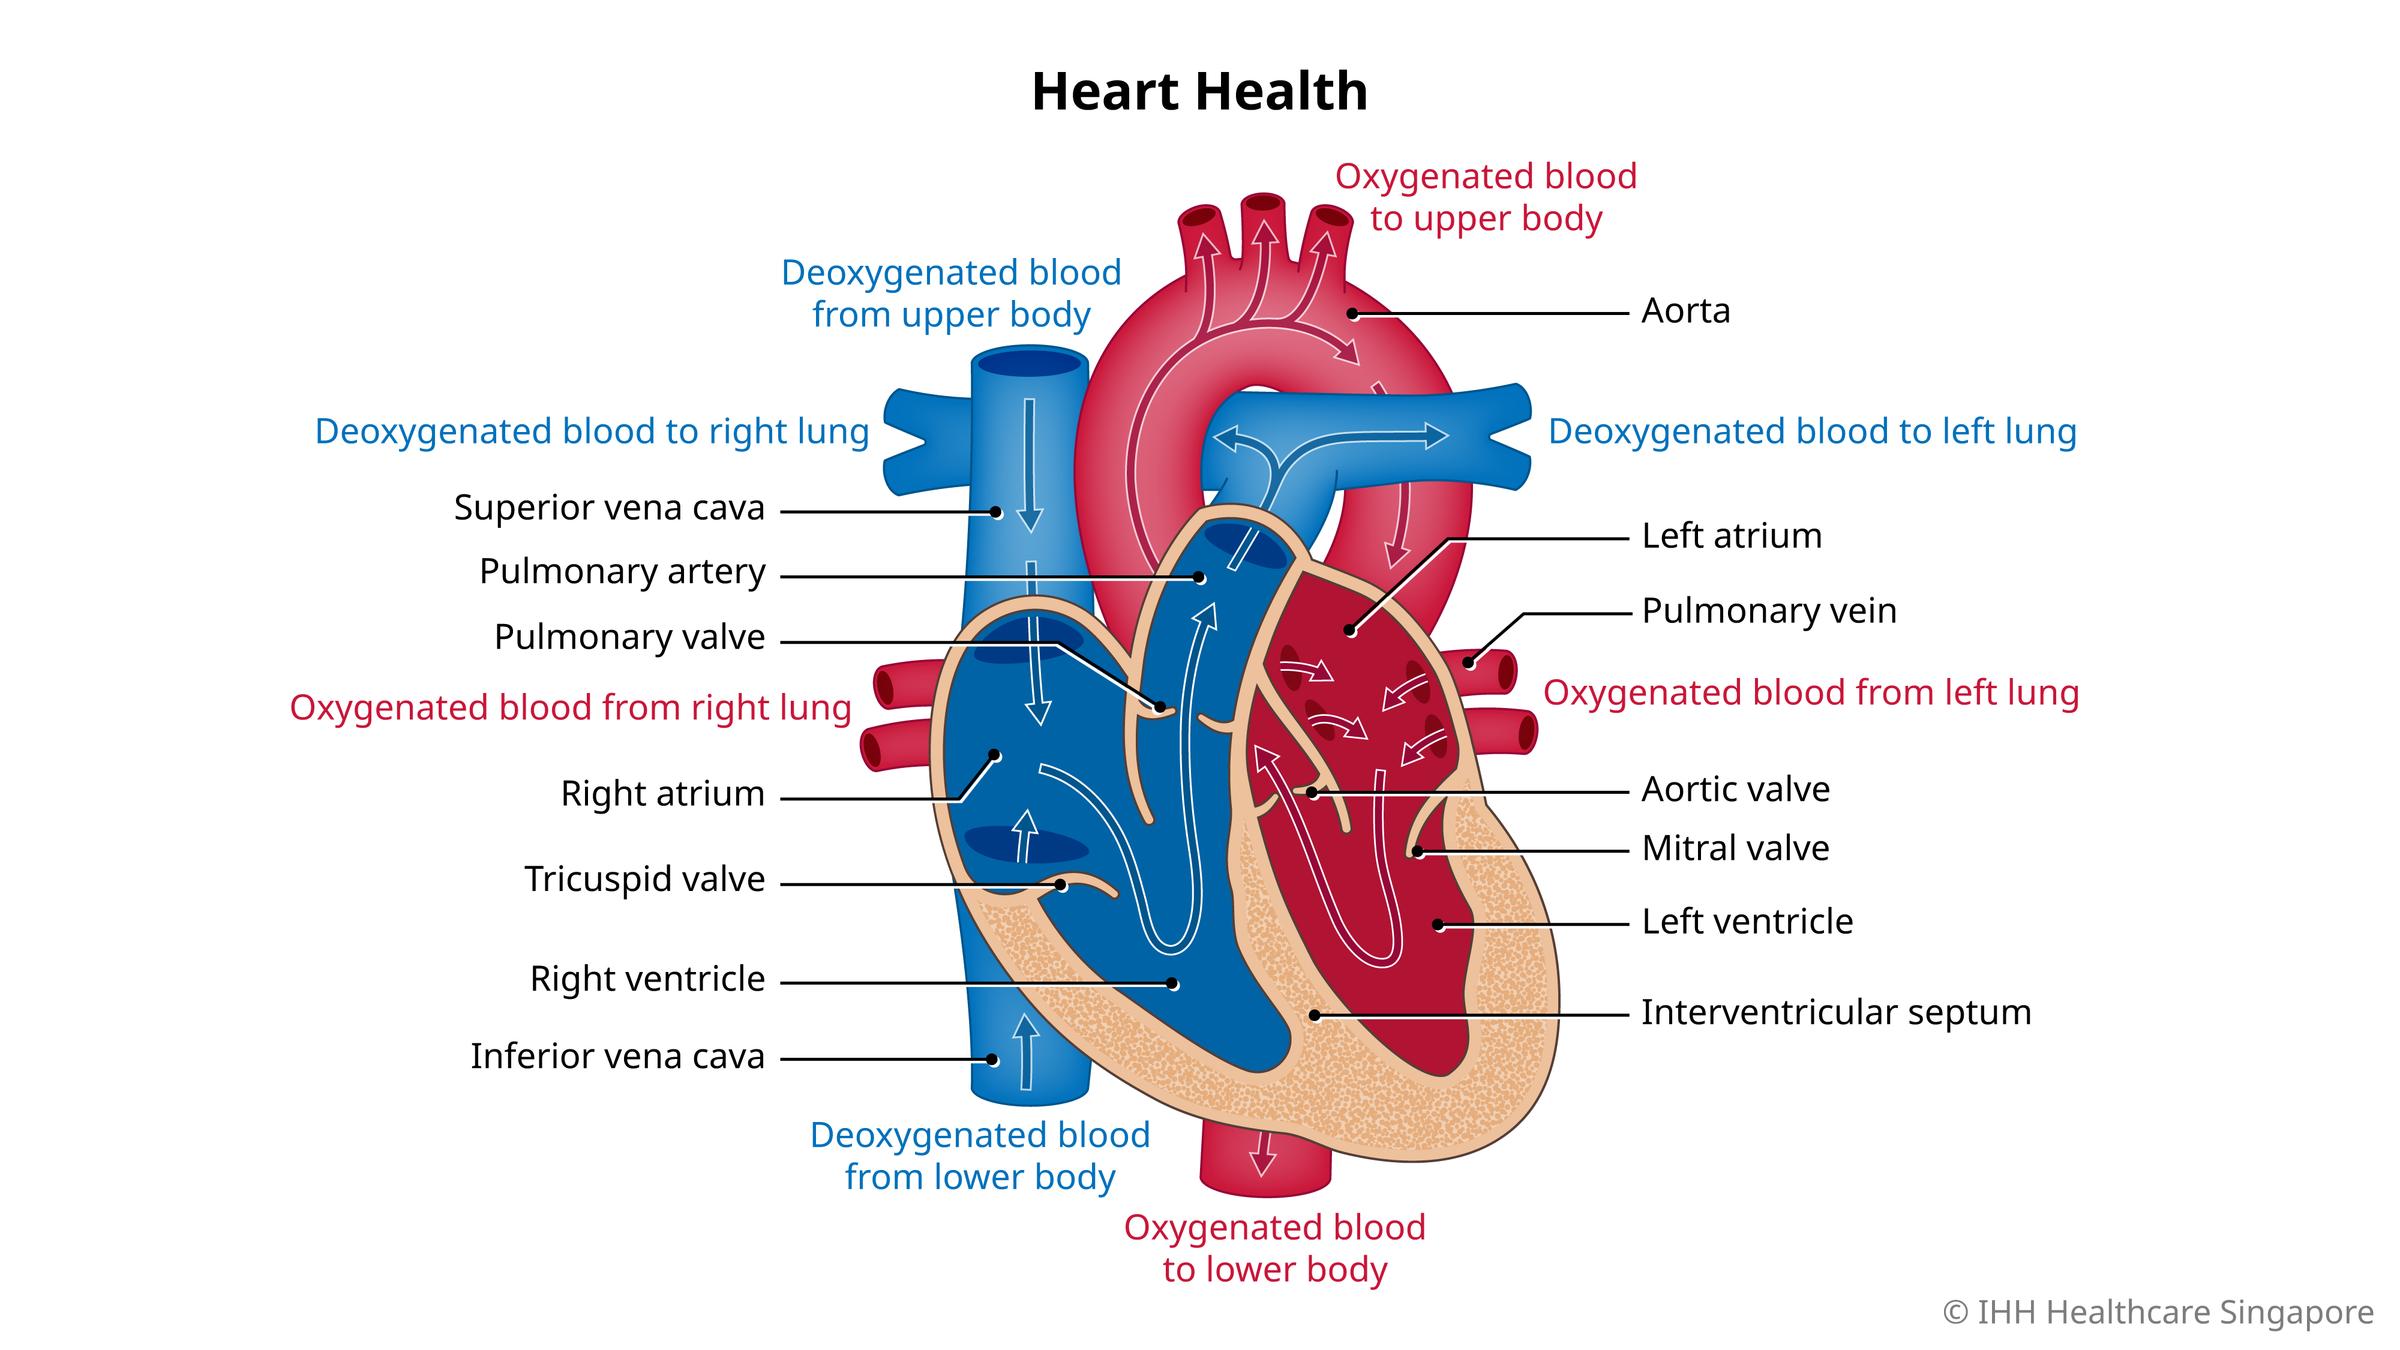 Anatomy of a healthy human heart (cross section).